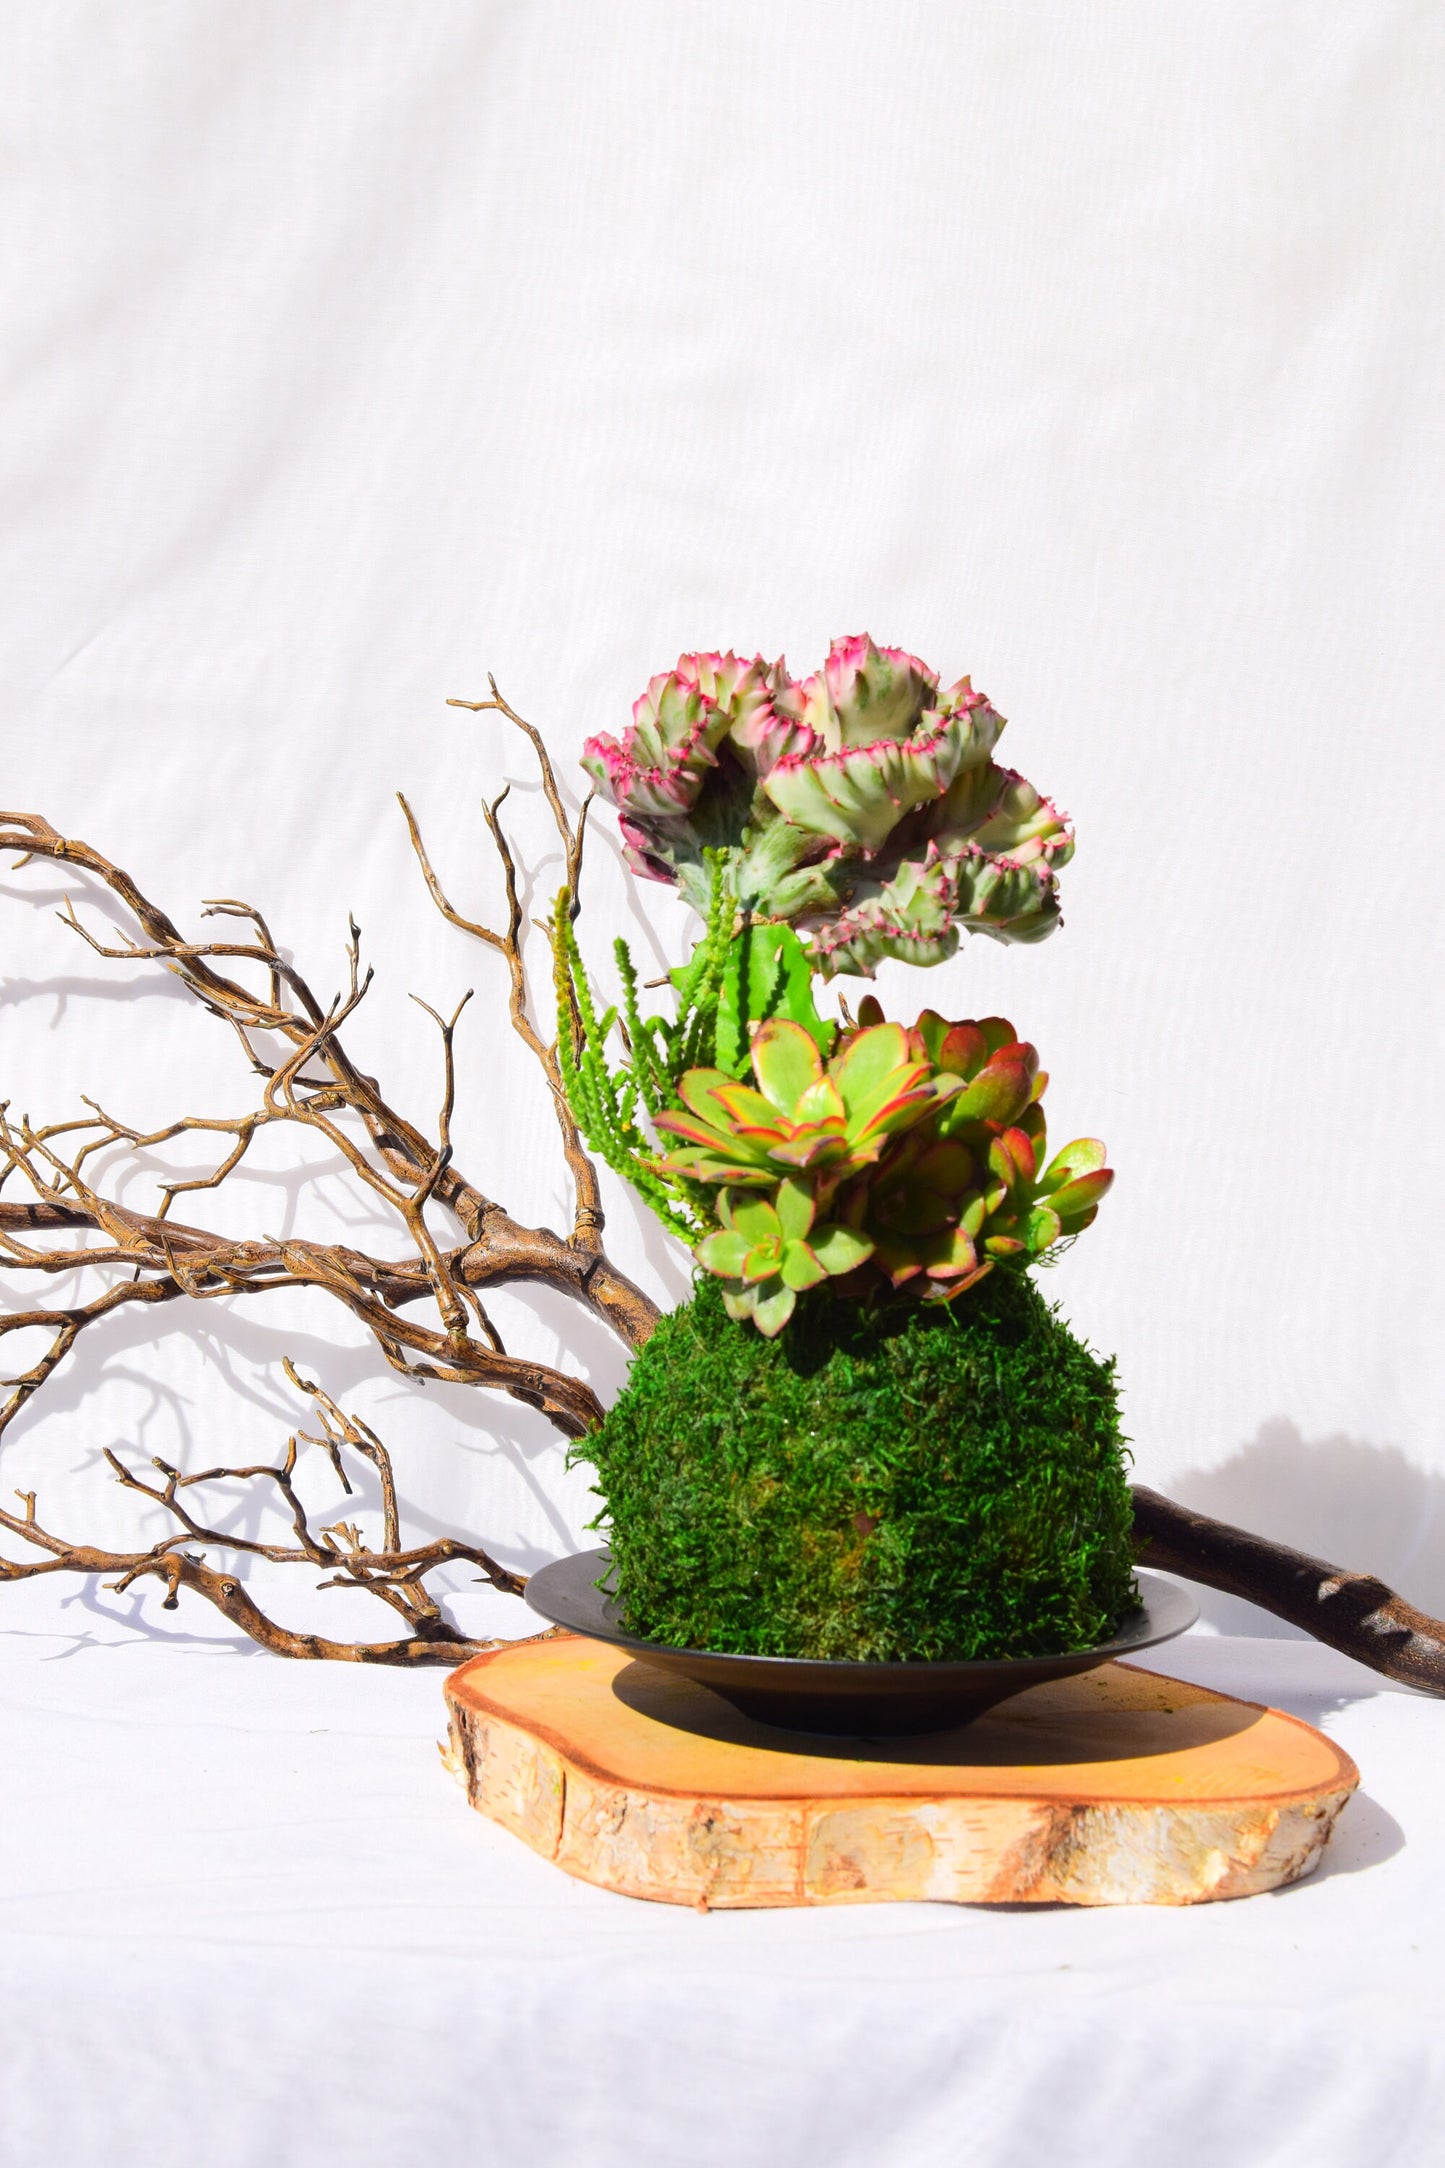 Coral Cactus with succulent combo Kokedama - Japanese Living Art - Moss ball